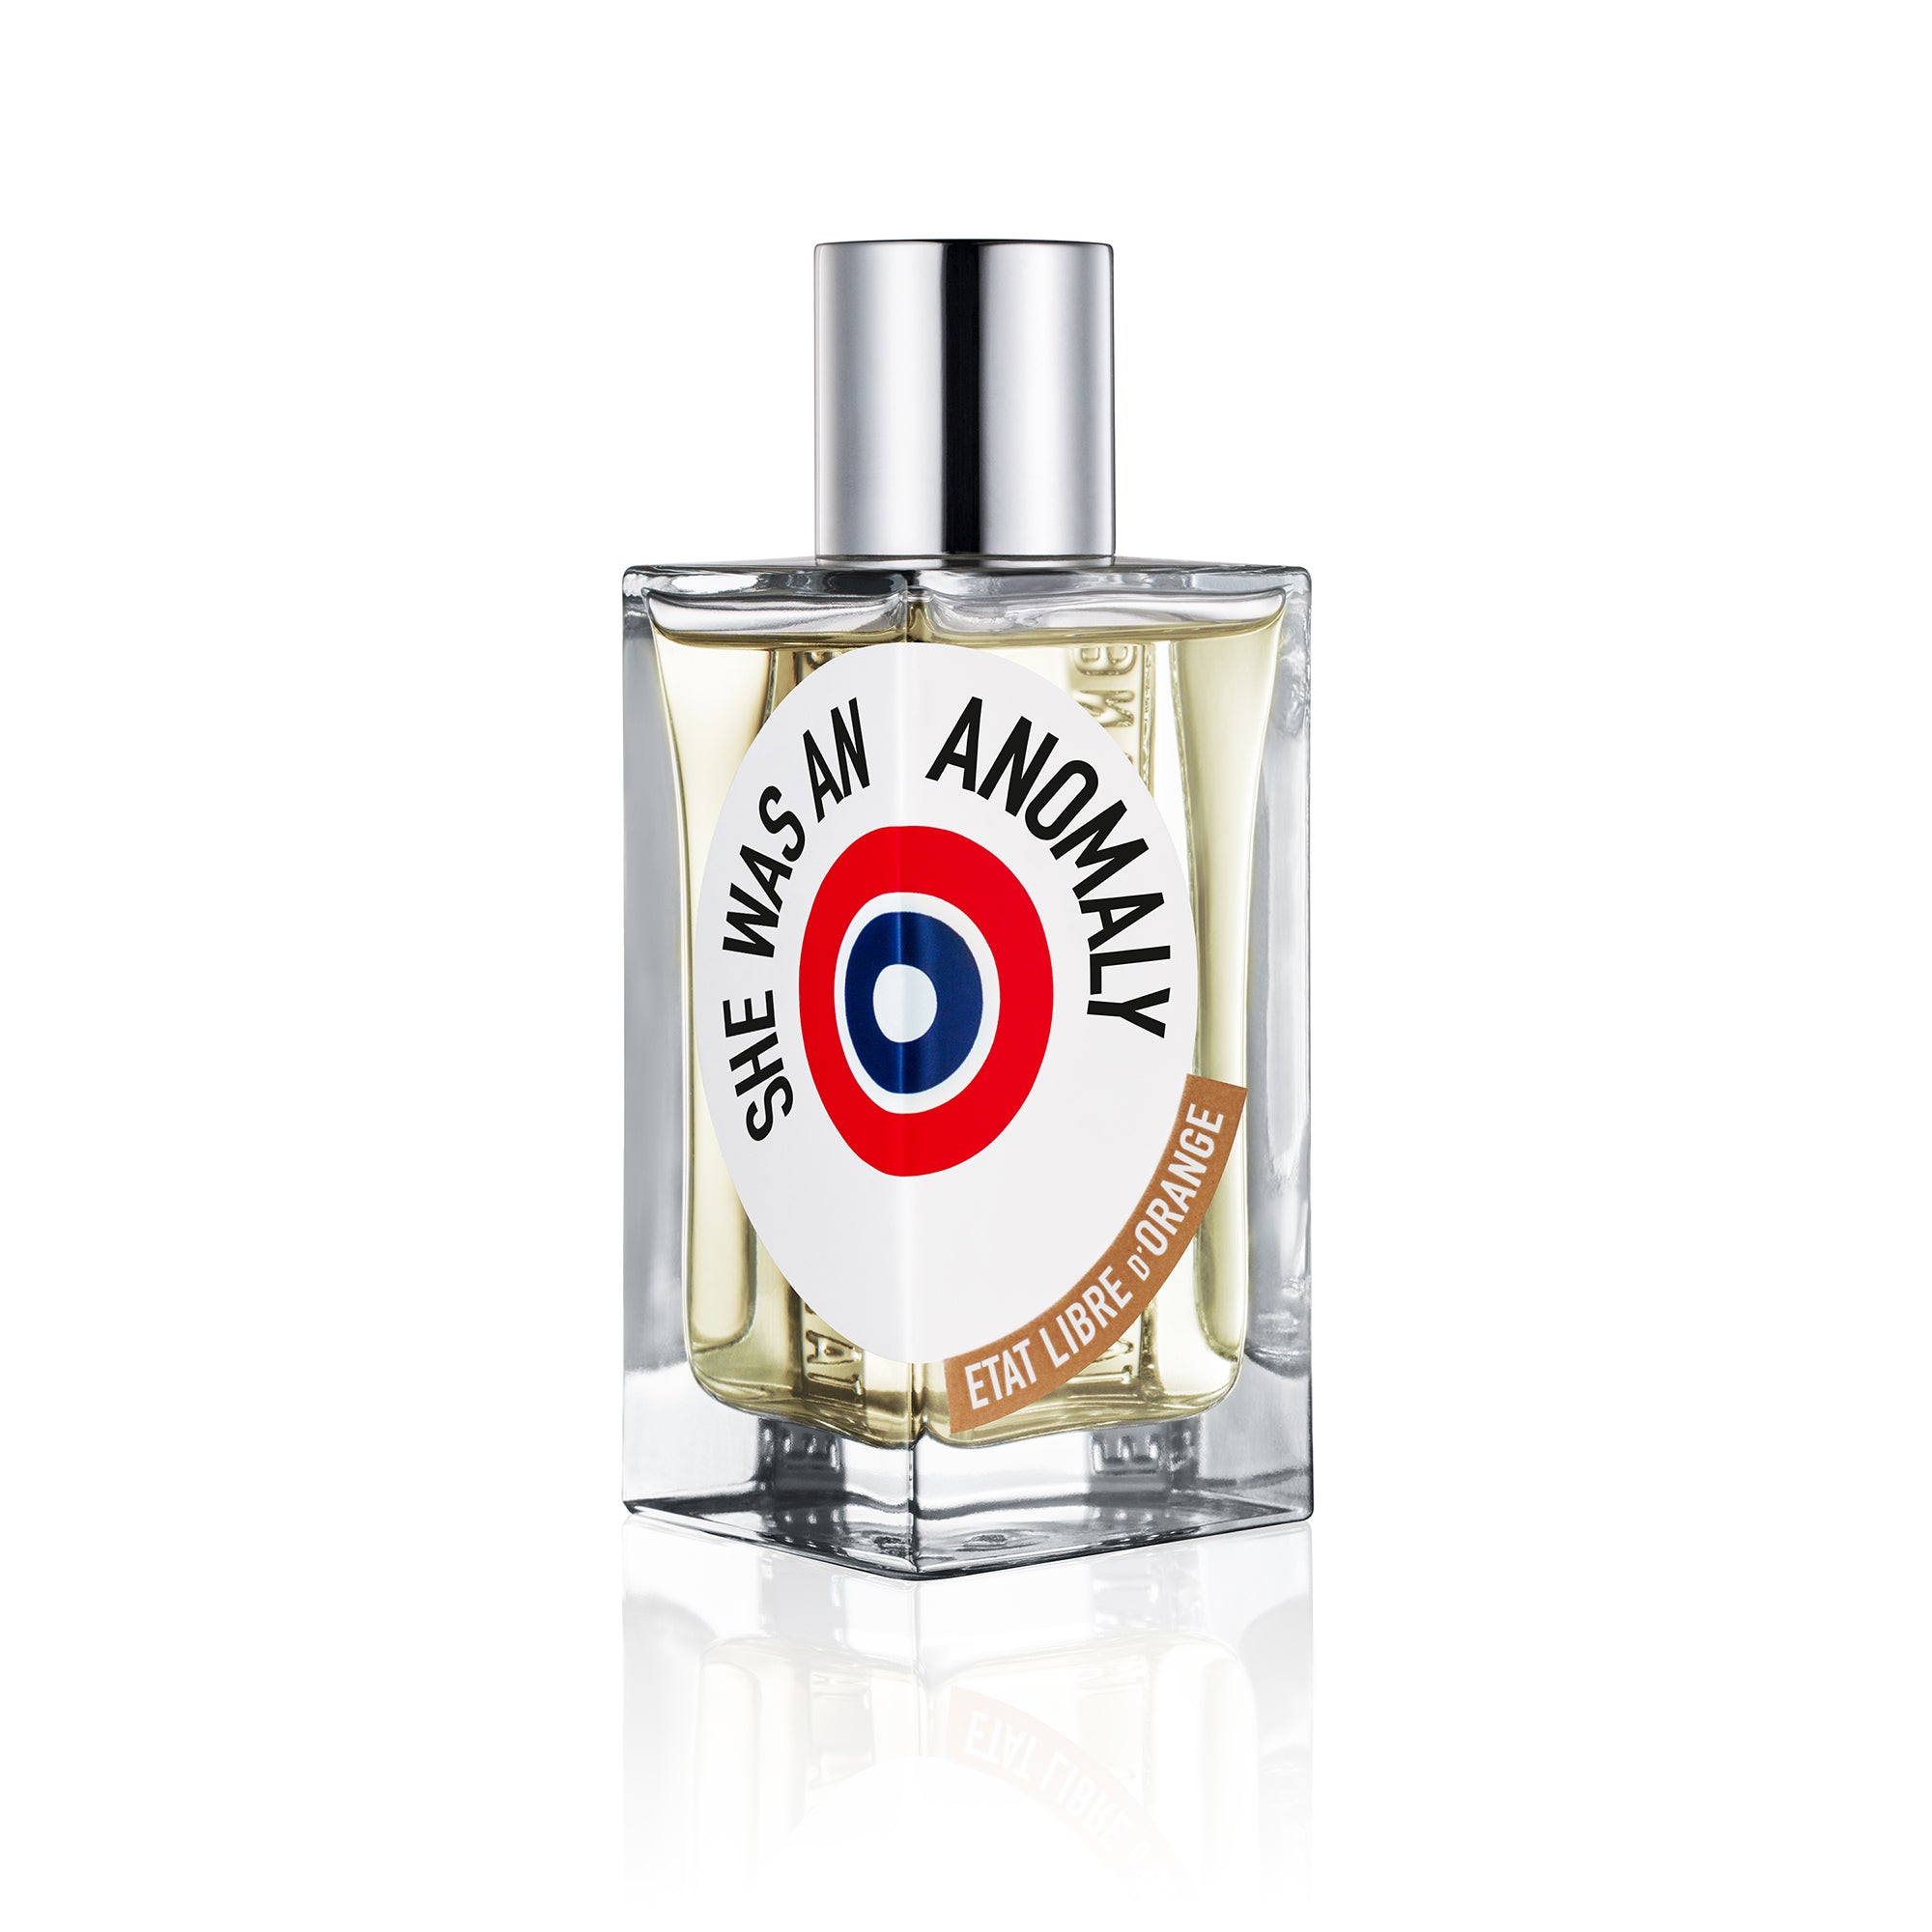 Etat Libre She was an Anomaly - 100ml